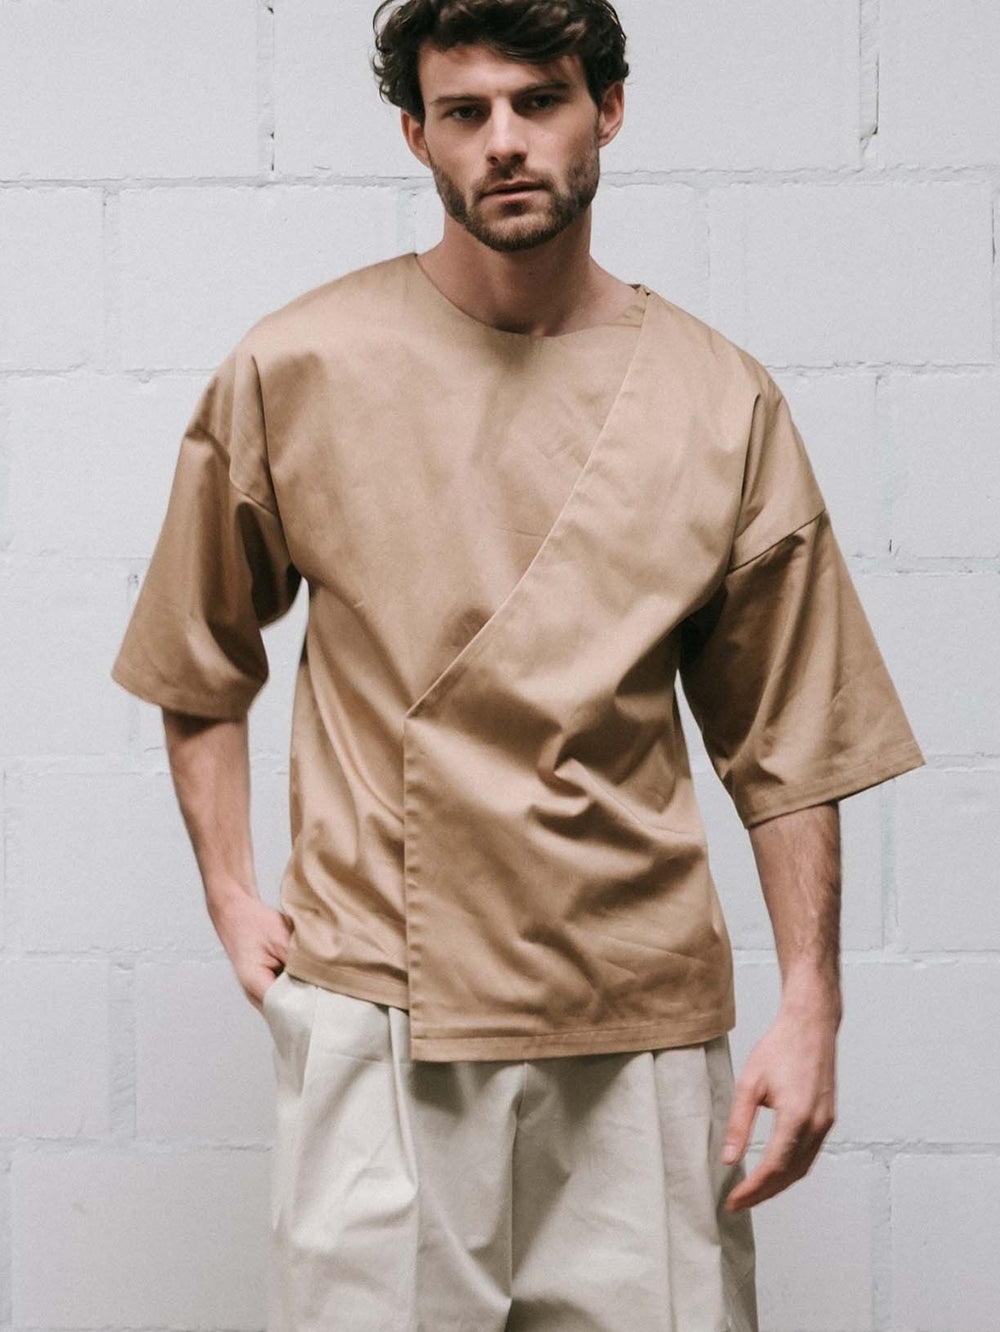 Man wearing the Men's Jack Shirt sewing pattern from Notches on The Fold Line. A shirt pattern made in cotton or linen fabric, featuring a round neckline, elbow length sleeves, and an overlapping front panel.